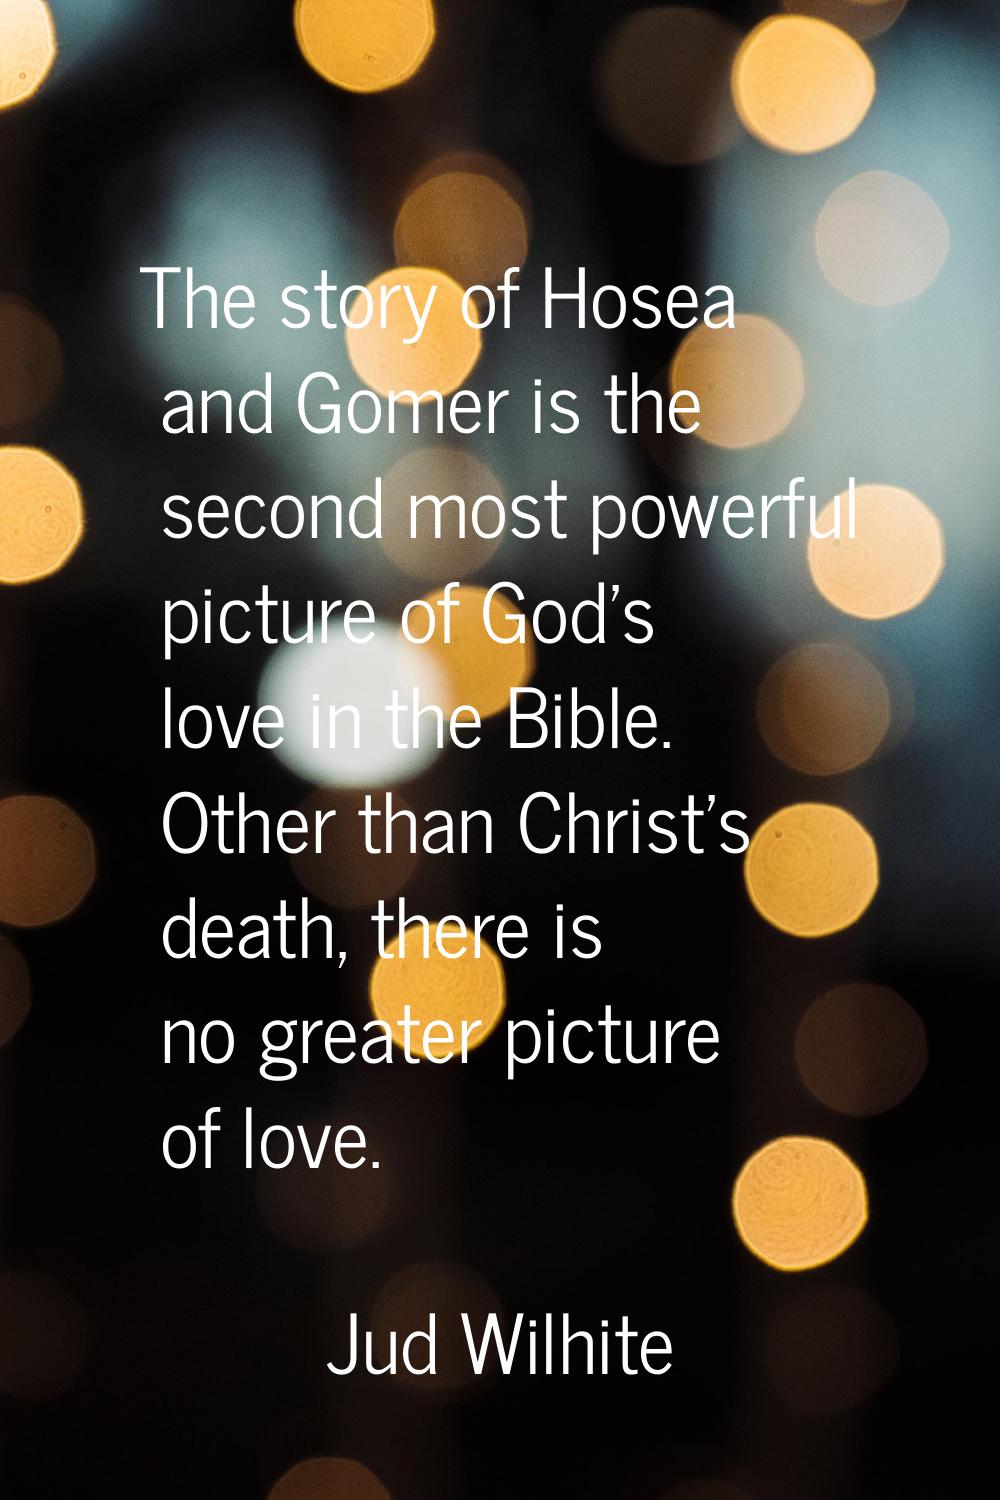 The story of Hosea and Gomer is the second most powerful picture of God's love in the Bible. Other 